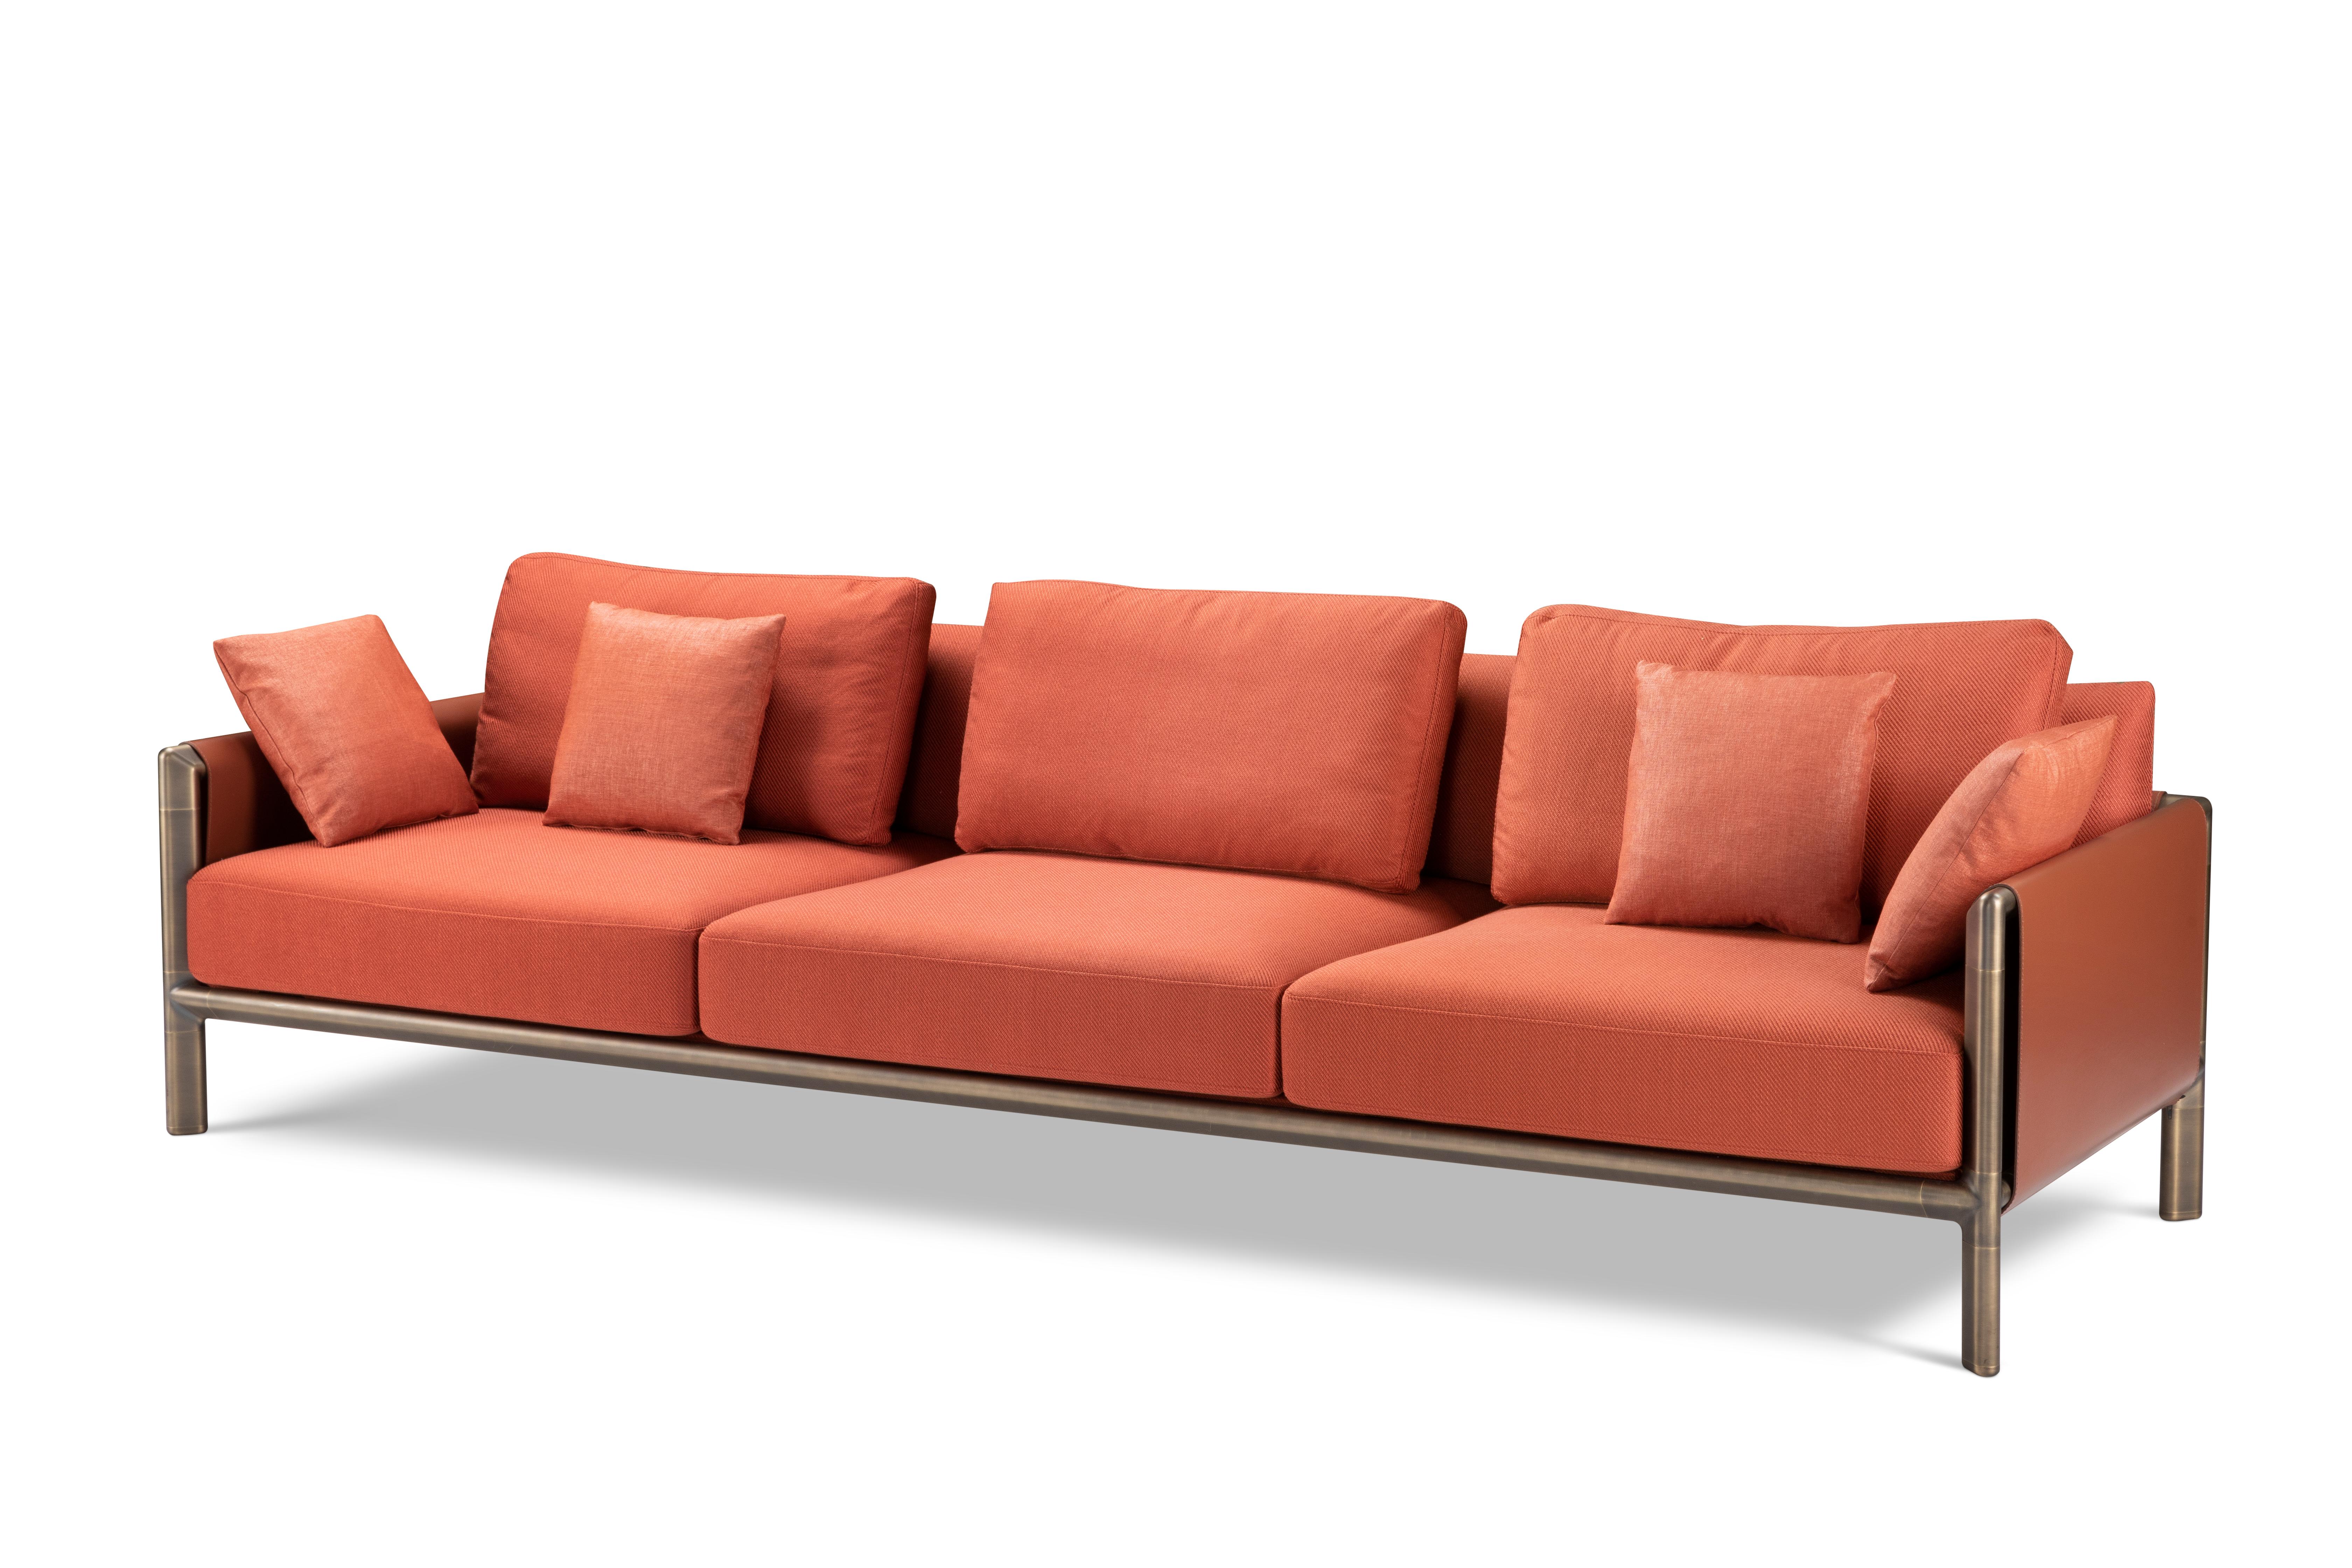 Ghidini 1961 Frame 3-Seat Sofa with Arms in Cuoio Leather by Stefano Giovannoni  For Sale 9